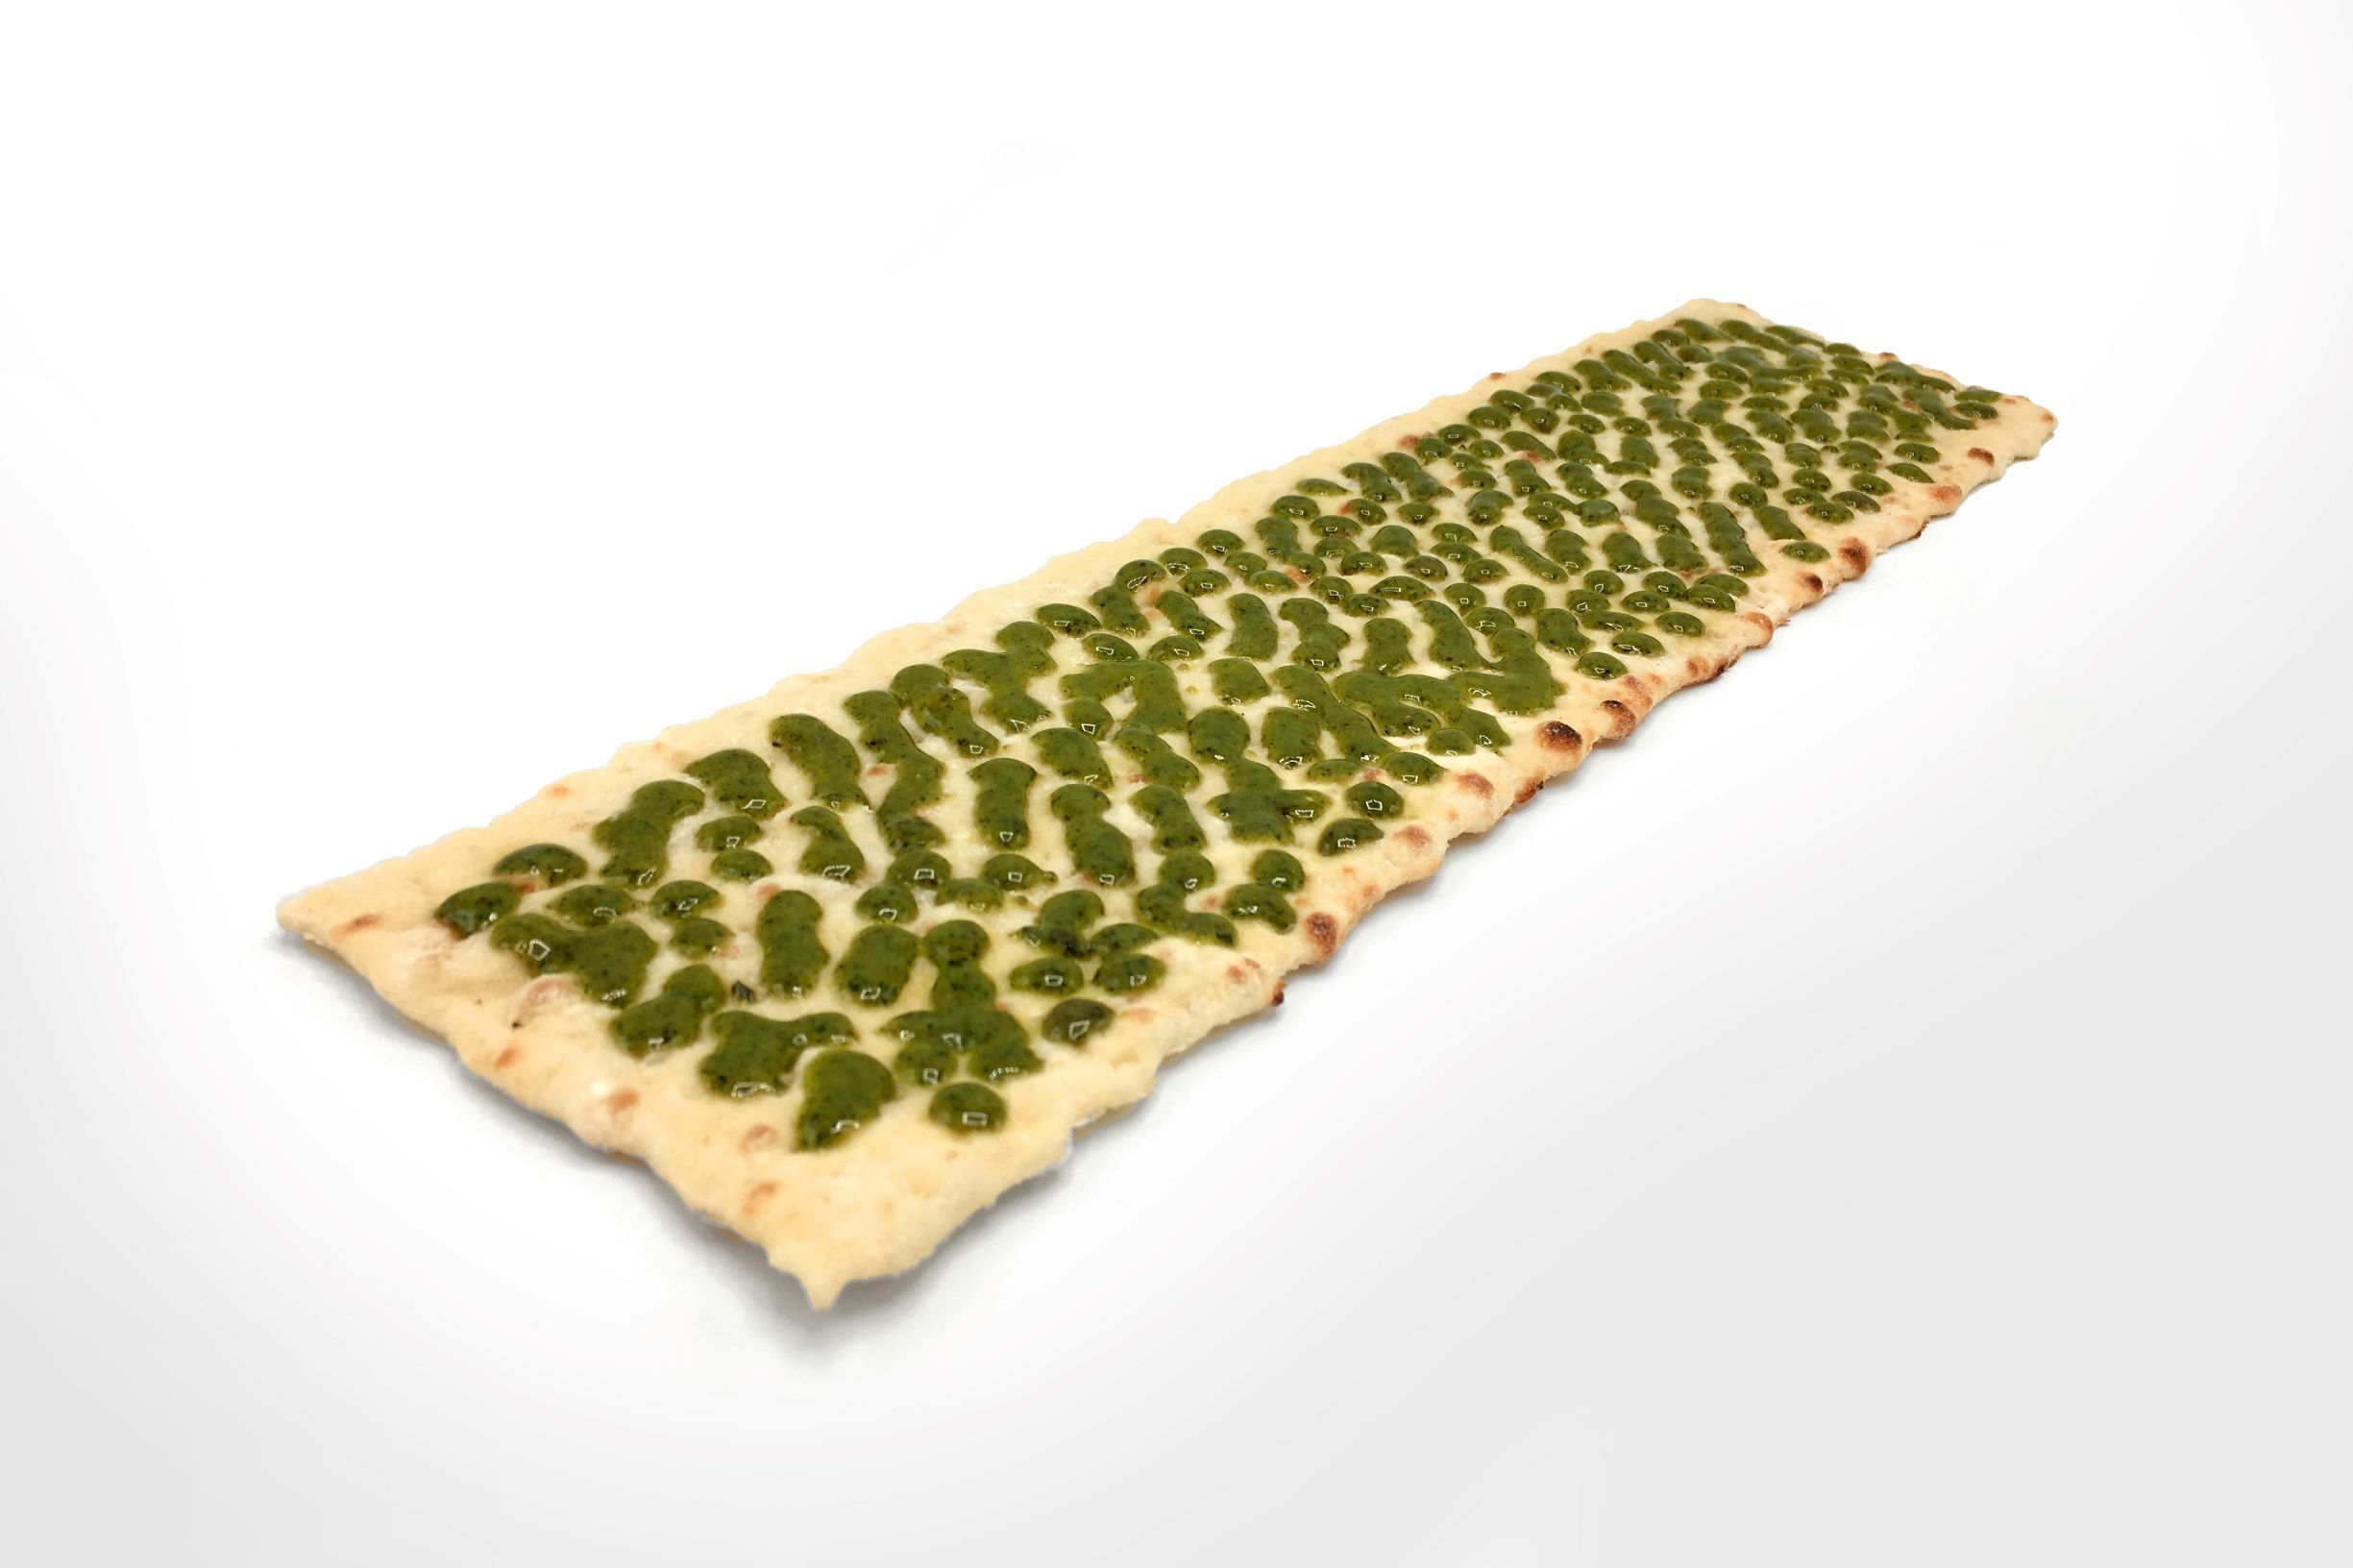 Flatbread with pesto sauce evenly applied by FoodJet sauce depositor